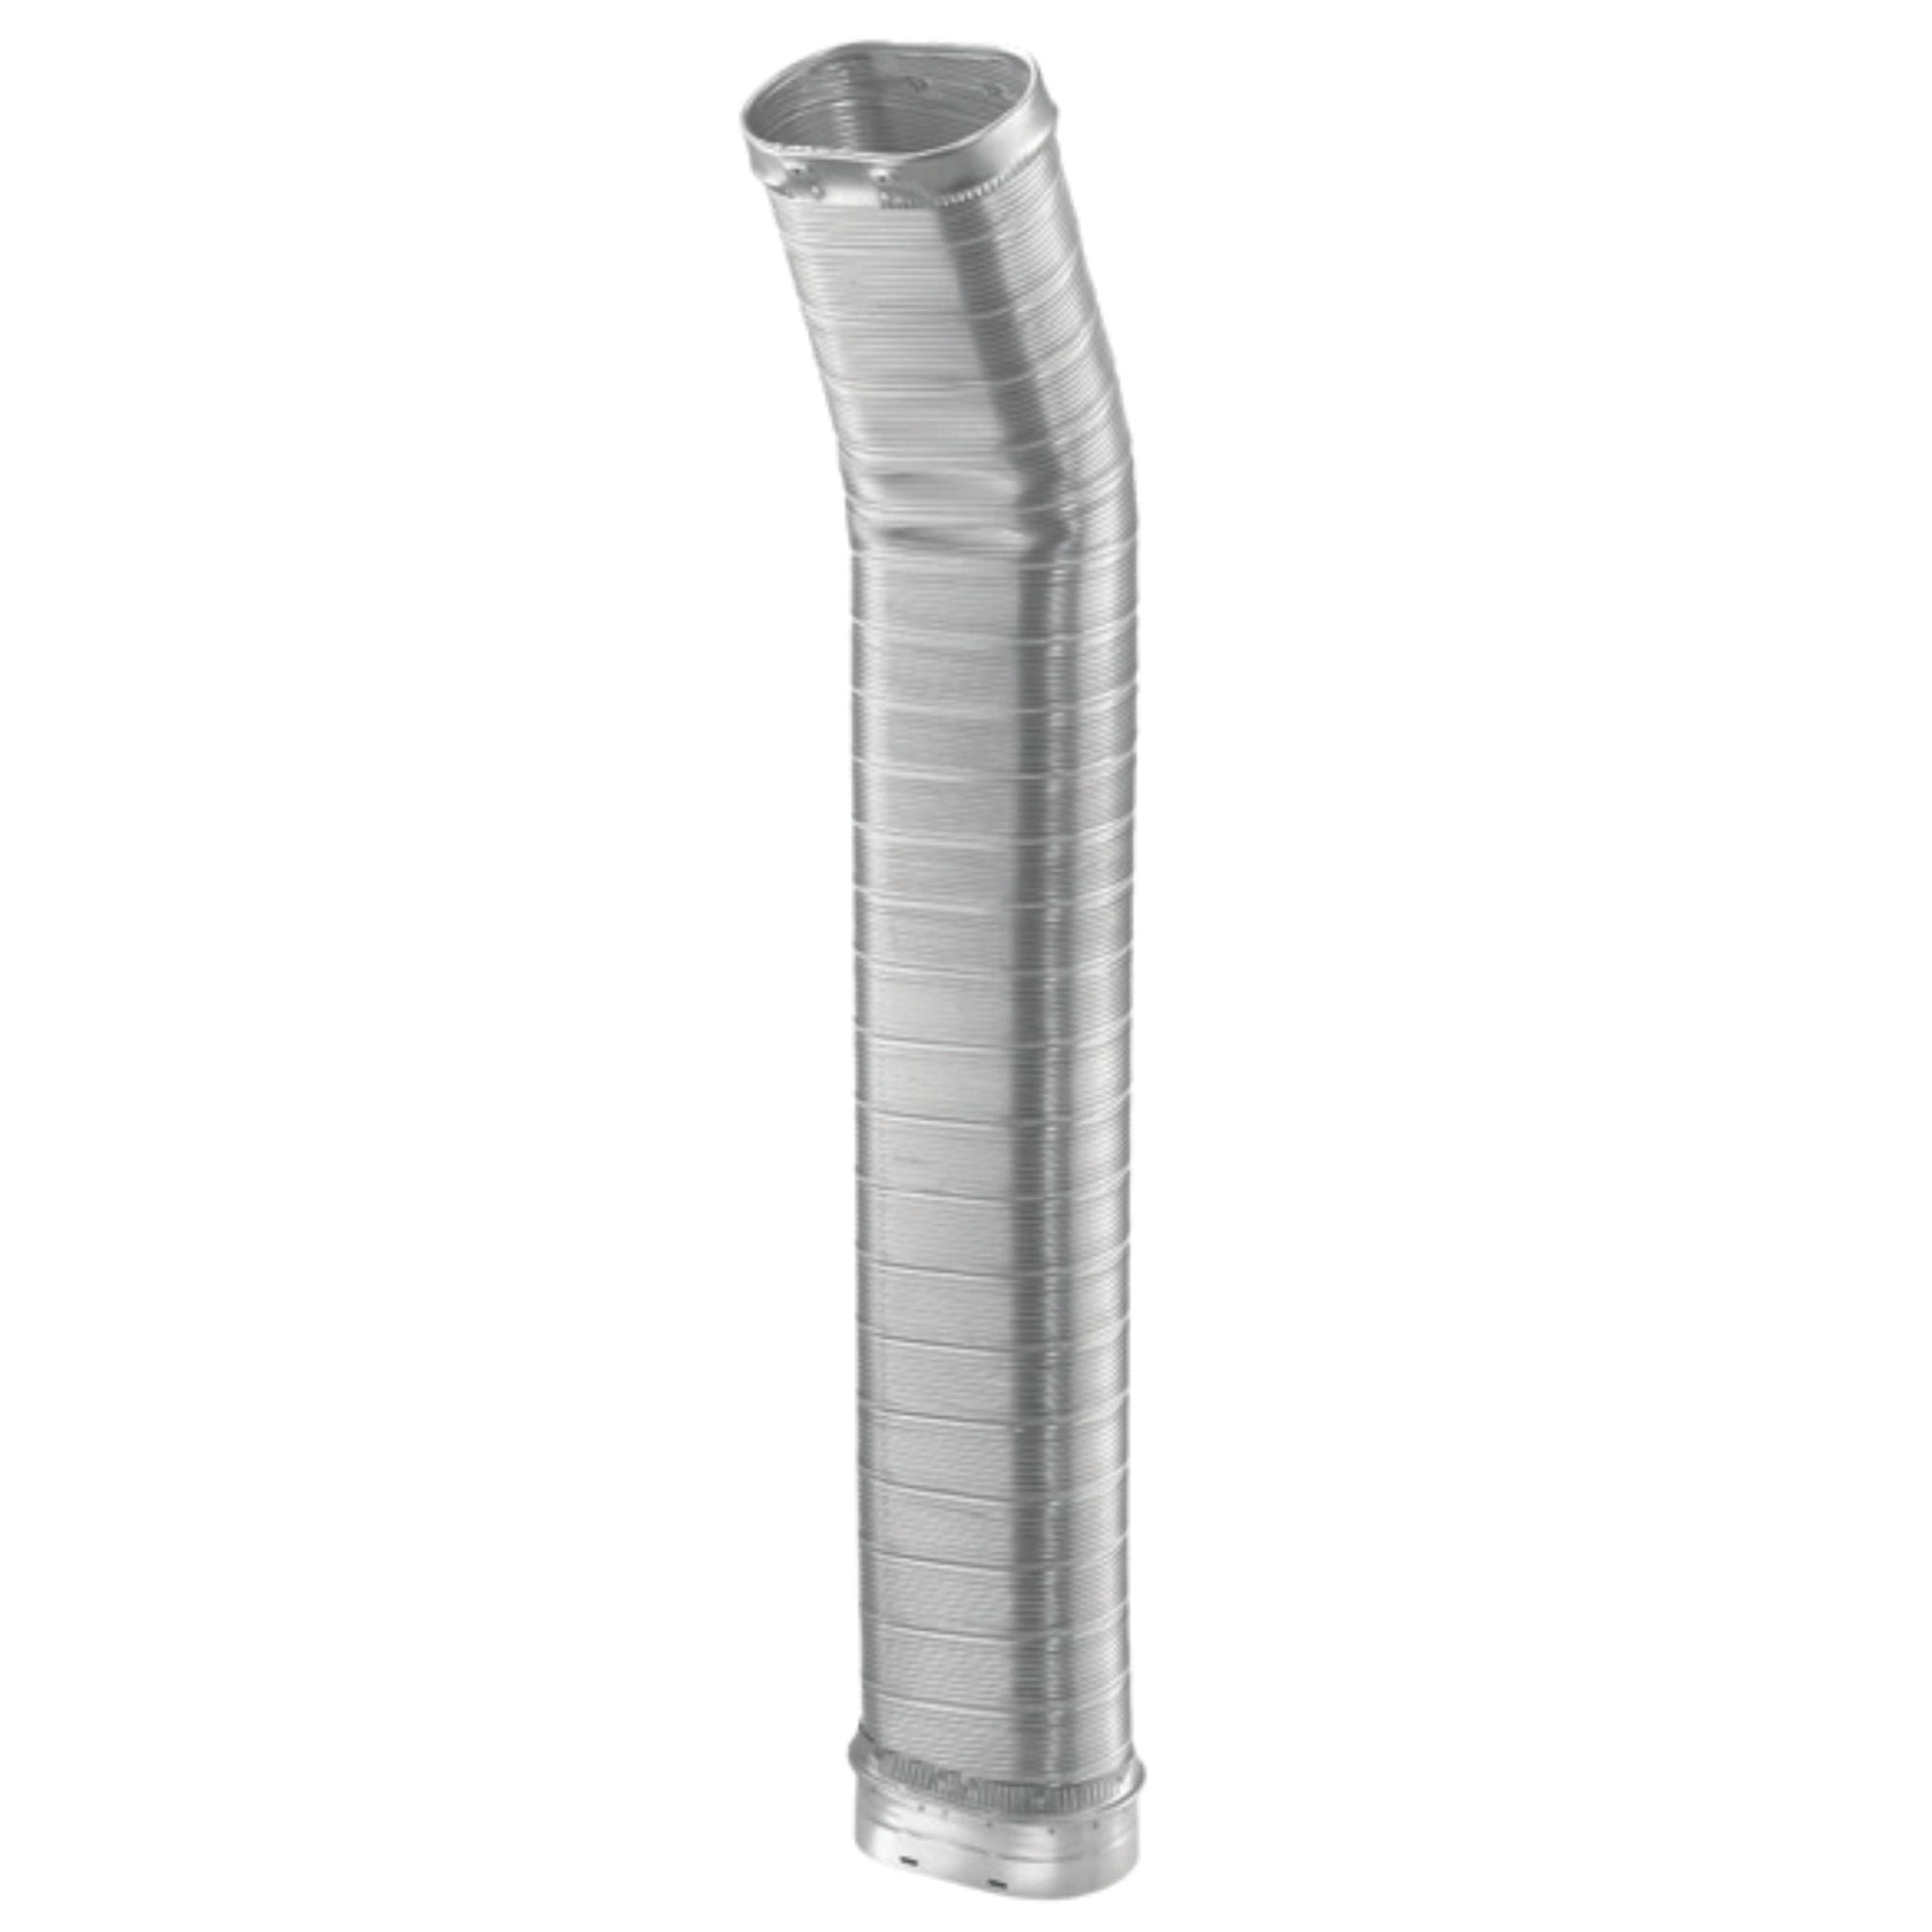 DuraVent DuraLiner 8" x 36" Oval-To-Oval Stainless Steel Flex Pipe